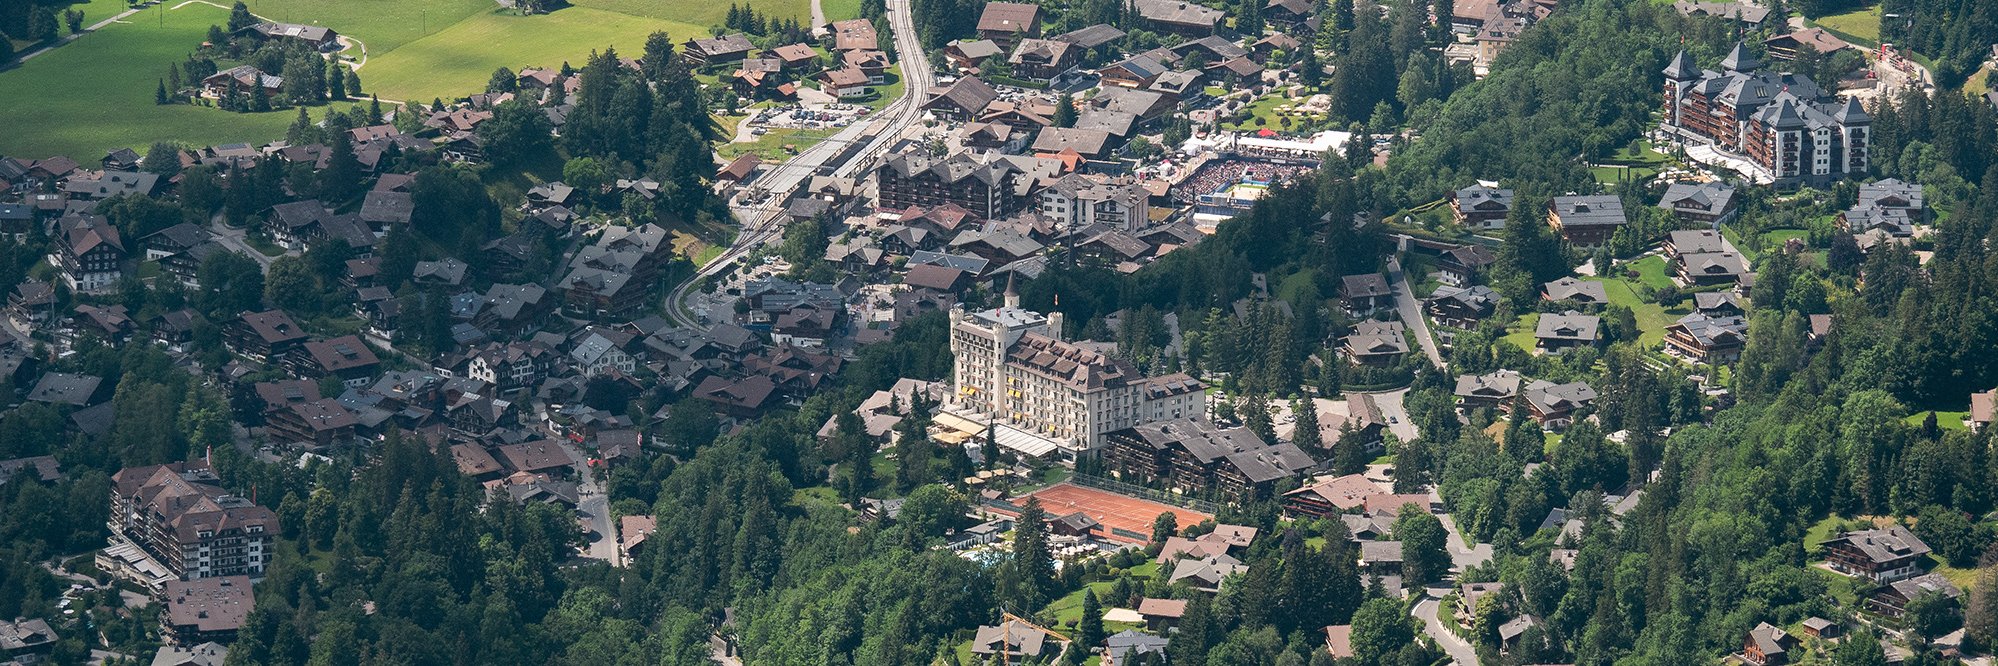 gstaad_lg